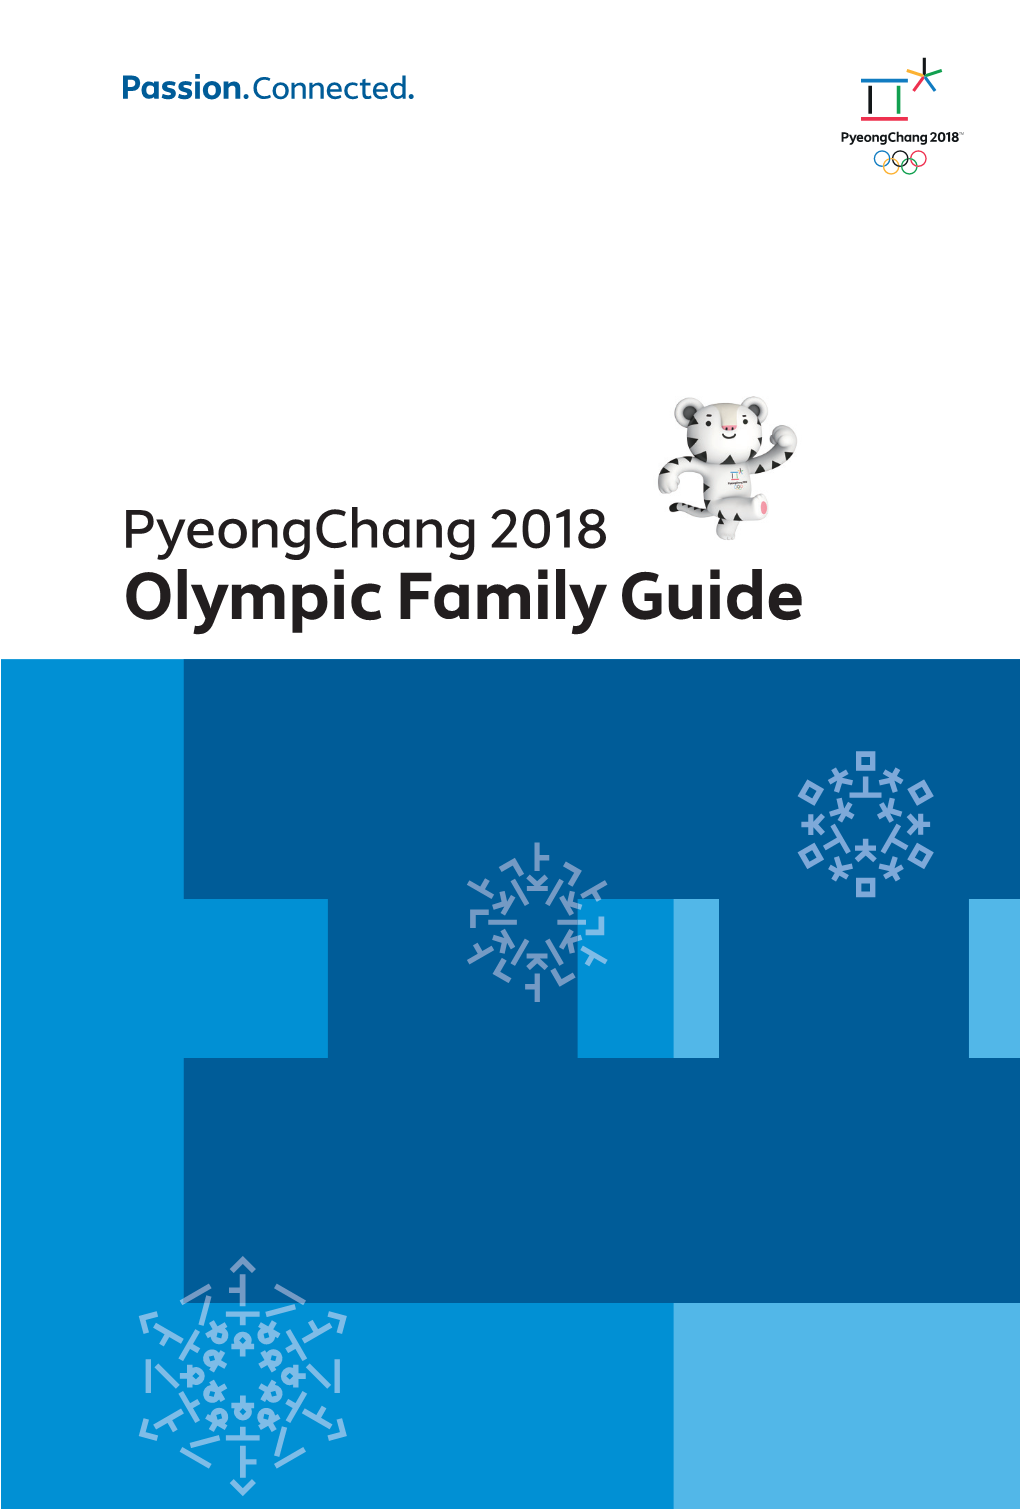 Olympic Family Guide Contents